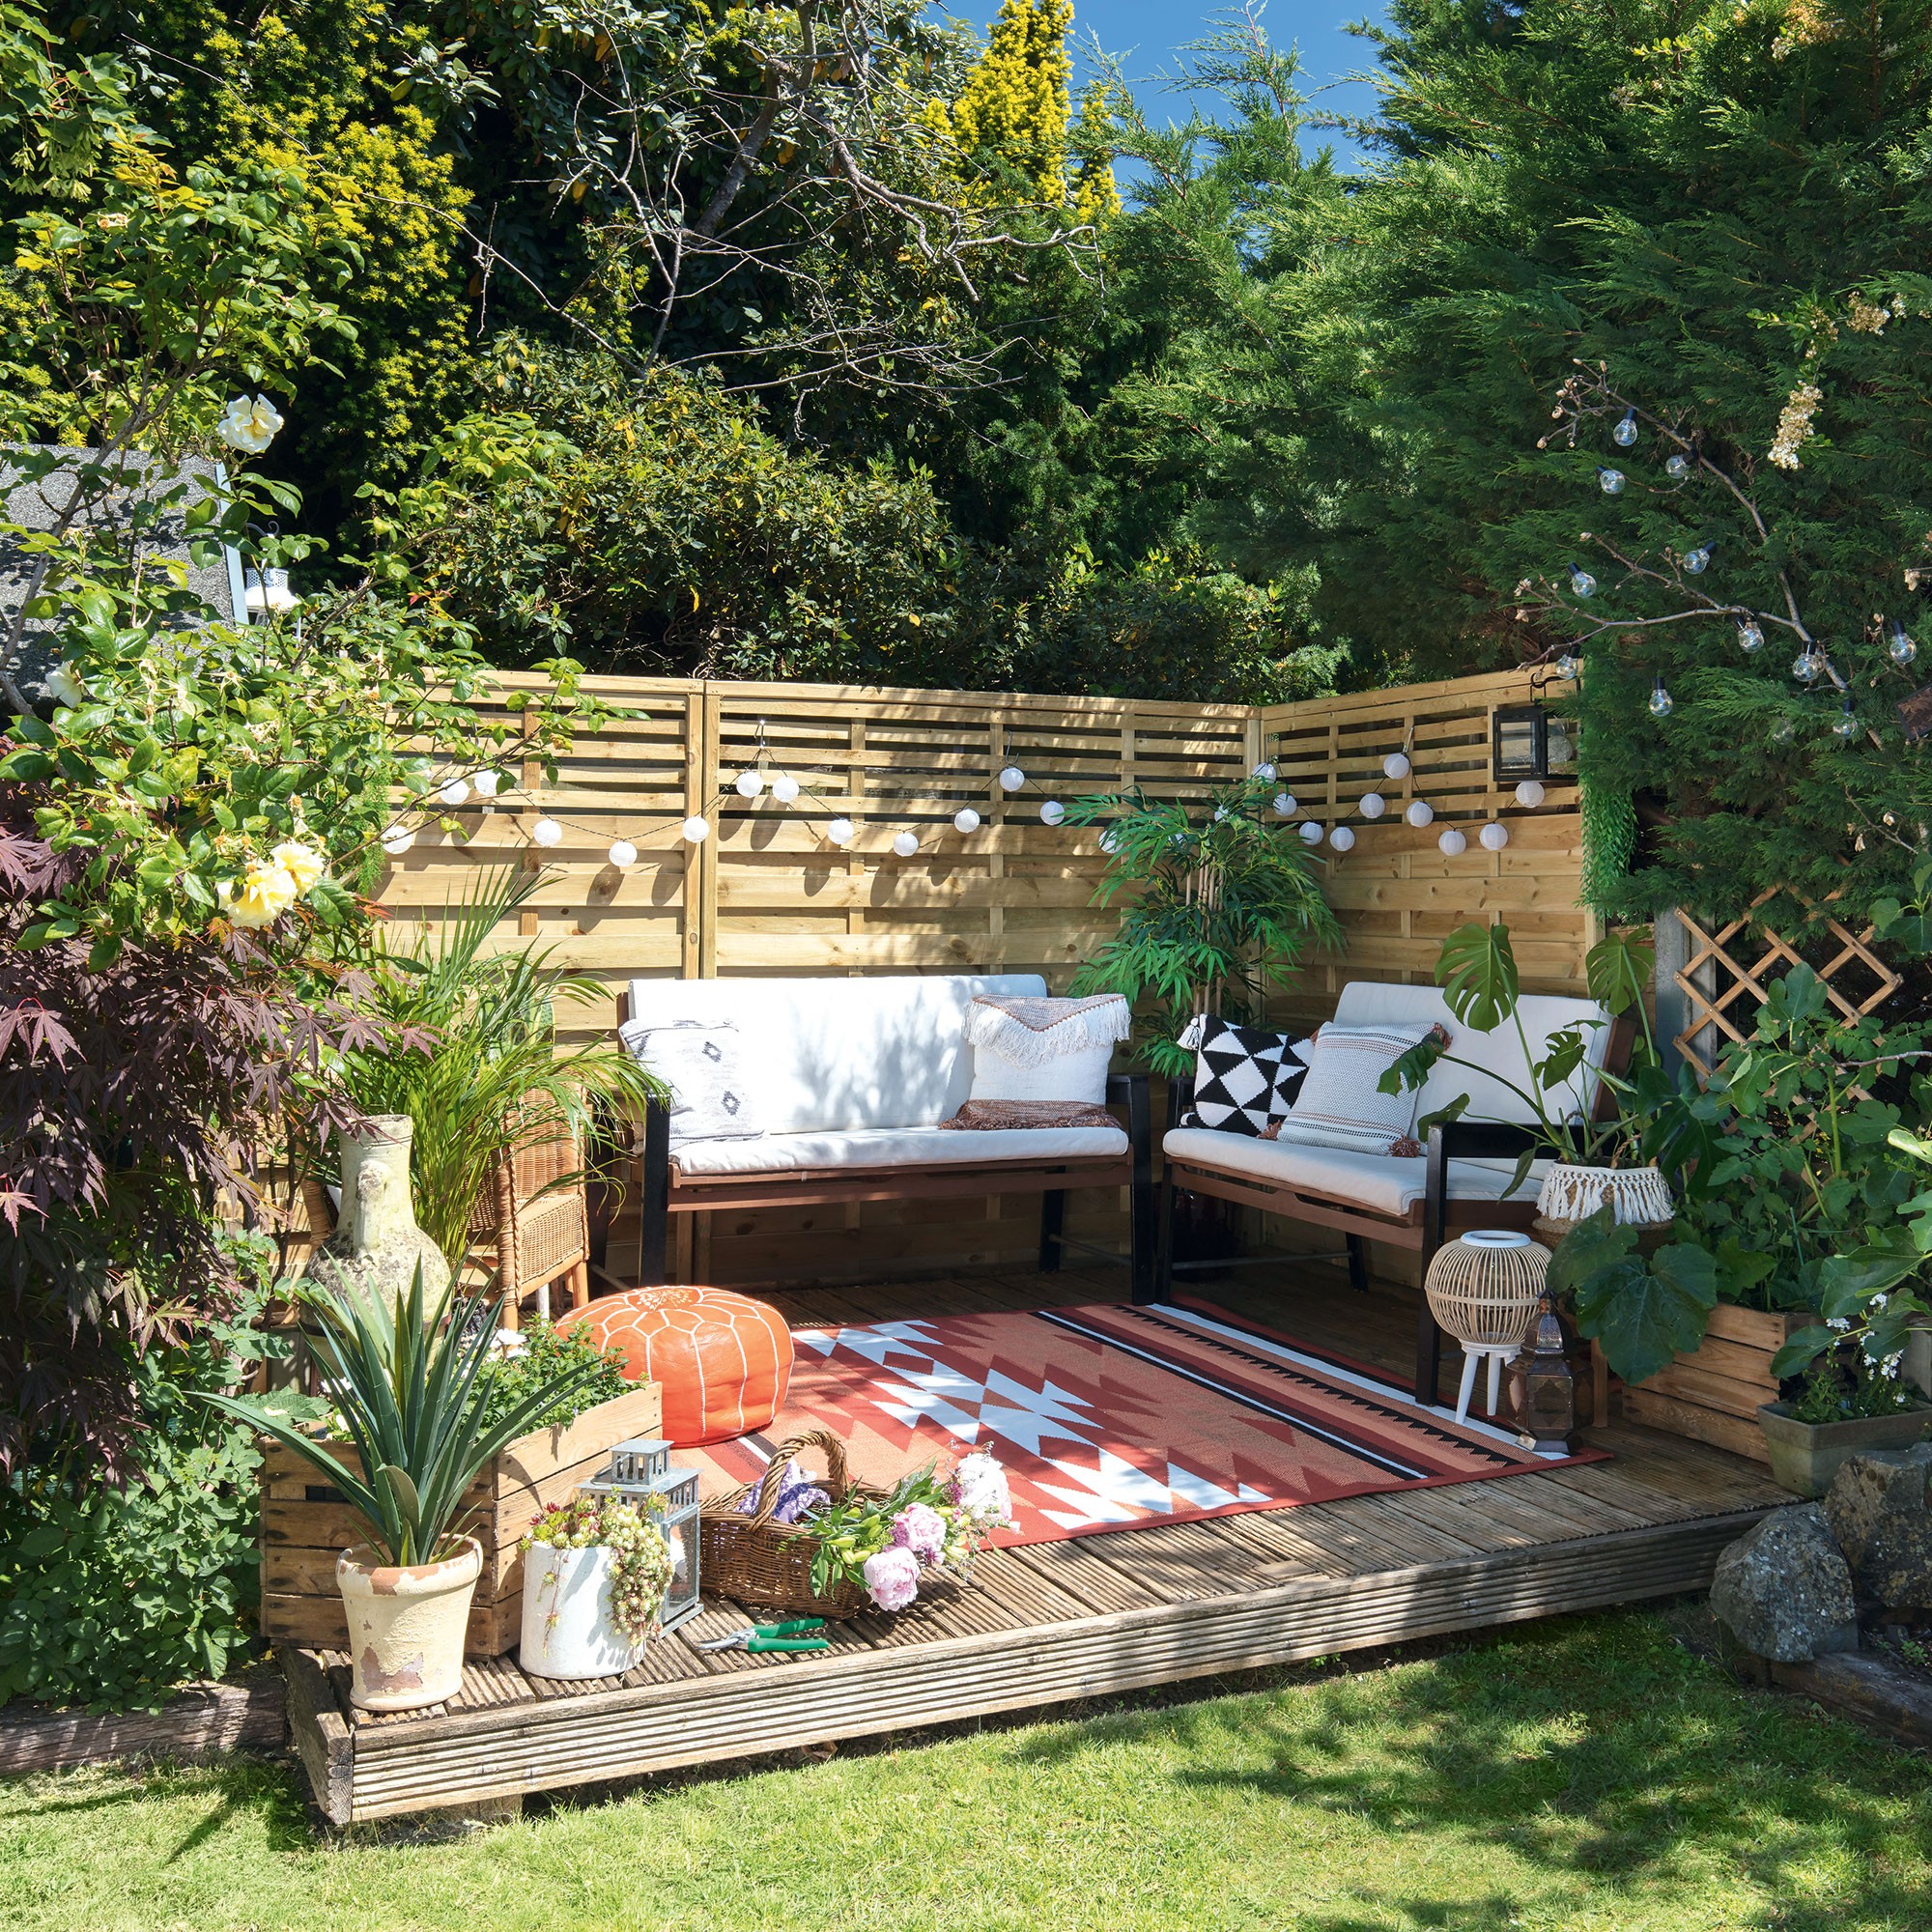 Small garden ideas to make the most of your outdoor space   Ideal Home